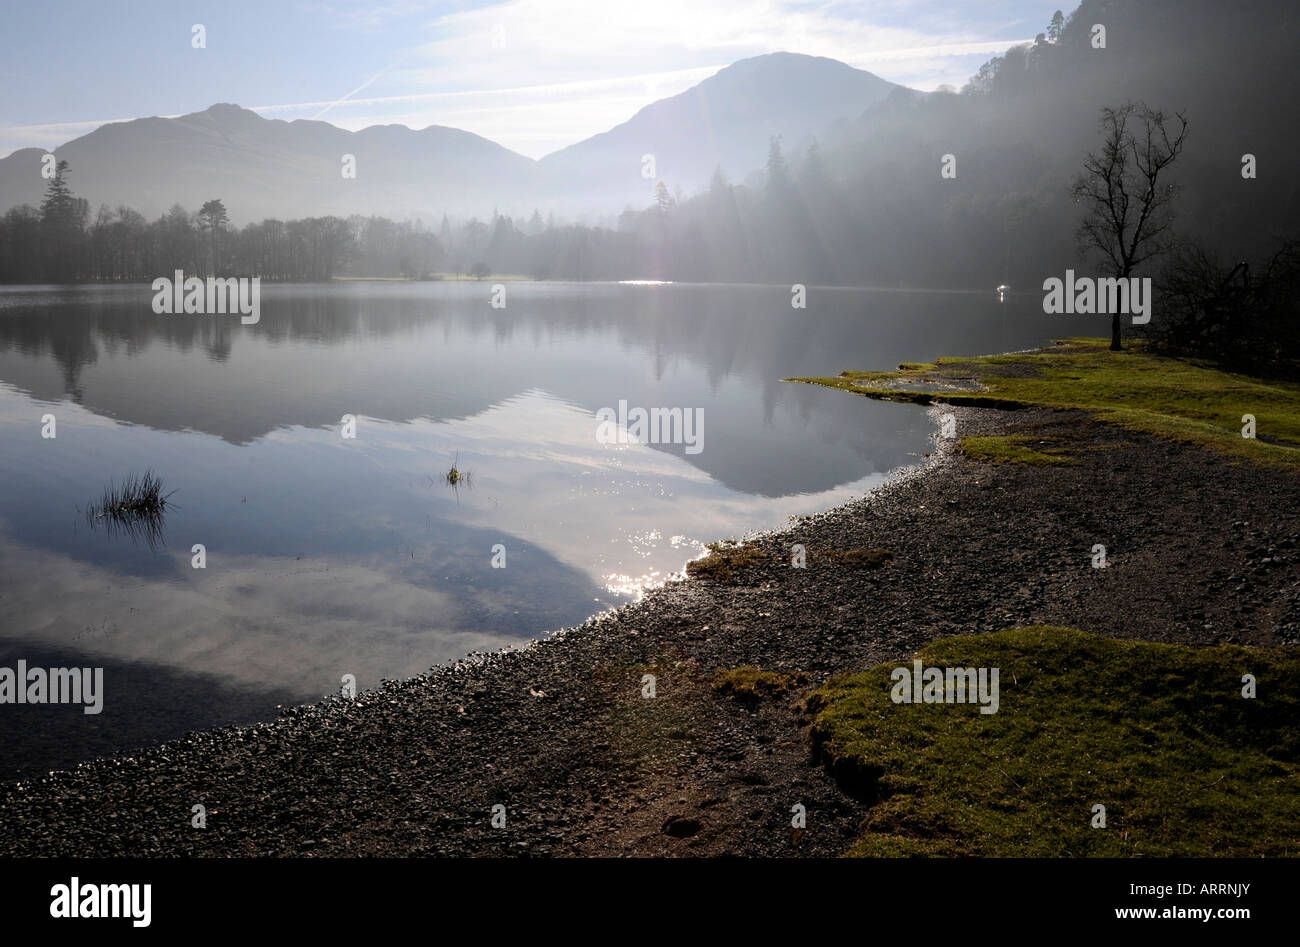 View of Southern end of Ullswater, Lake Disrtrict, England Stock Photo